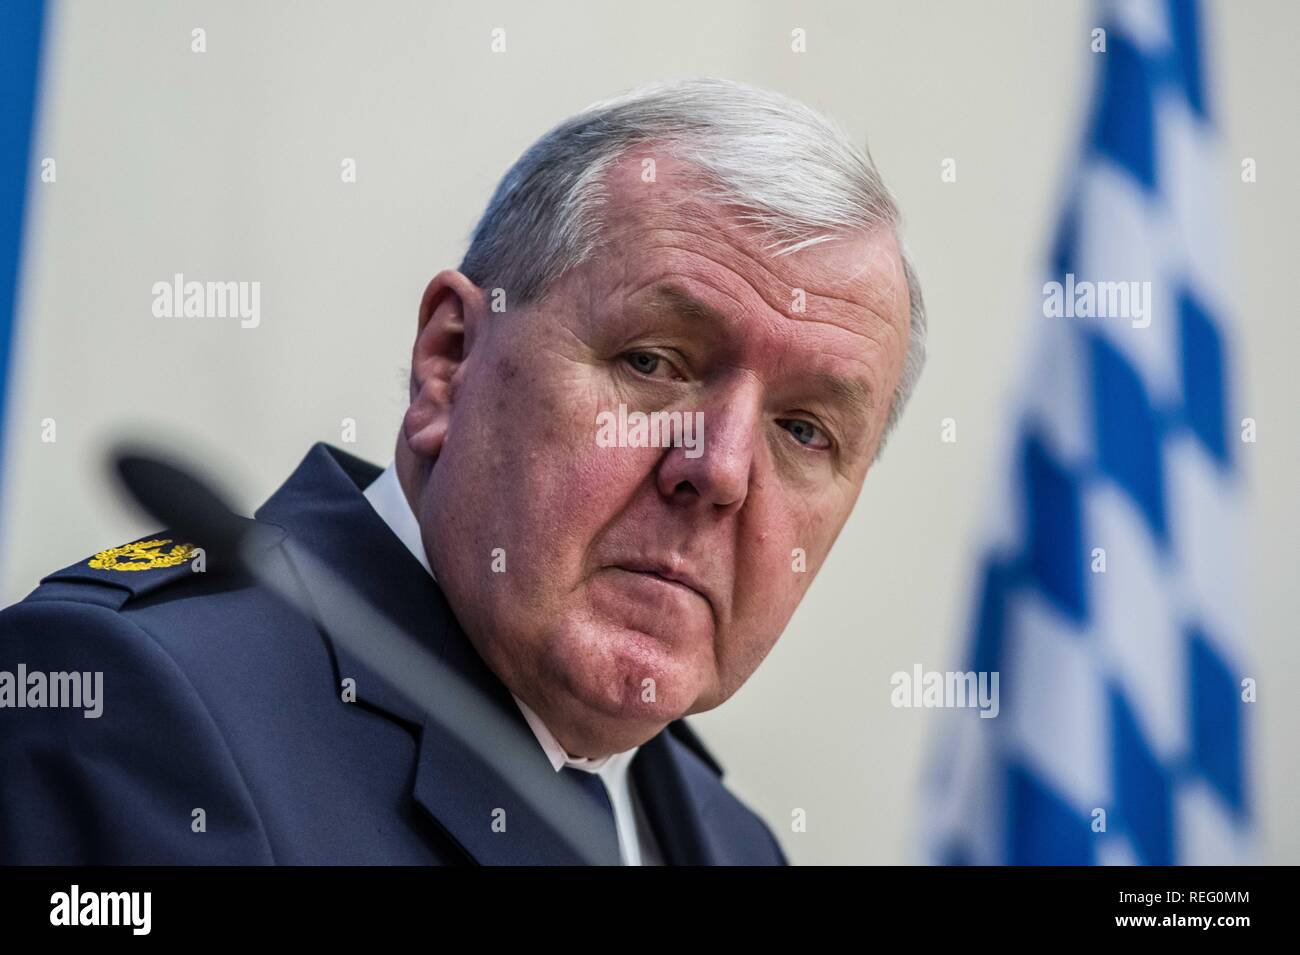 Munich, Bavaria, Germany. 21st Jan, 2019. Direktor der Bayerischen Grenzpolizei ALOIS MANNICHL. The Bavarian Innenminister Joachim Herrmann and the Direktor der Bayerischen Grenzpolizei Alois Mannichl presented the half year statistics of the controversial border police (Grenzpolizei) that operates at the border crossings between Germany and Austria. Herrmann announced plans to double the border protection police by 2023.ment including endoscopes for detection of smuggled items. The Grenzschutzpolizei was originally created by Bavar Credit: ZUMA Press, Inc./Alamy Live News Stock Photo